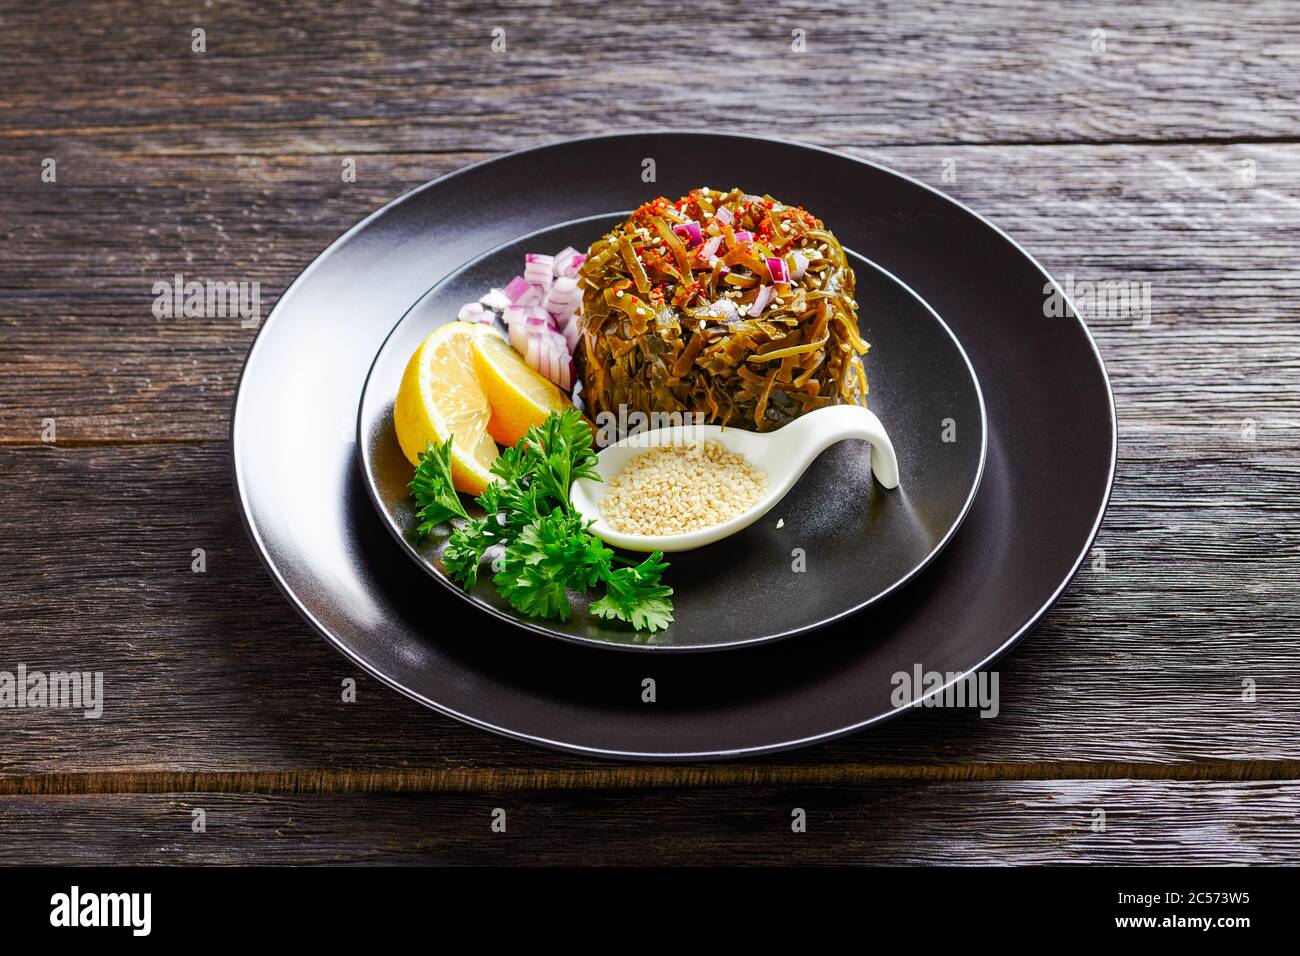 Healthy Japanese Food Salad Of Marinated Wakame Seaweed With Oil Red Onion And Lemon Wedges Served On A Black Plate With Curly Parsley Sesame See Stock Photo Alamy